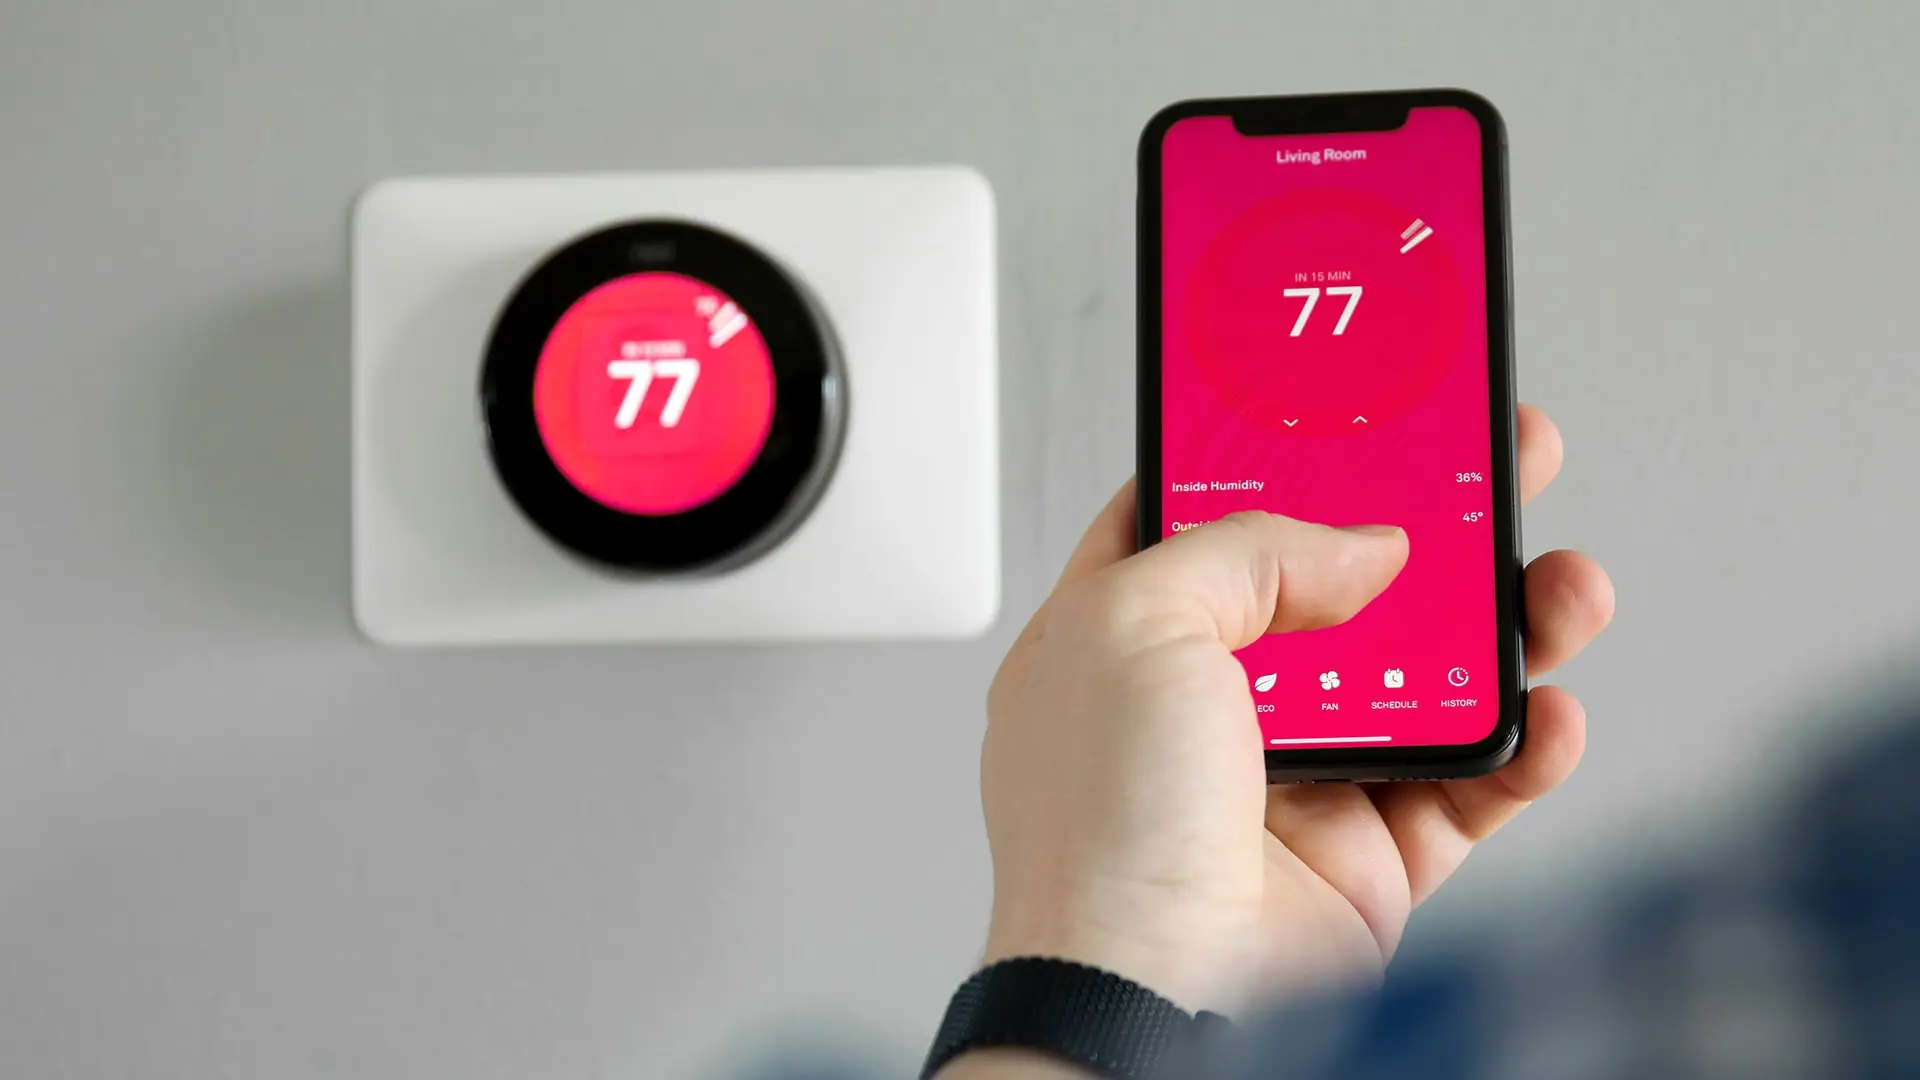 nest thermometer on wall being monitored by cell phone user on the app